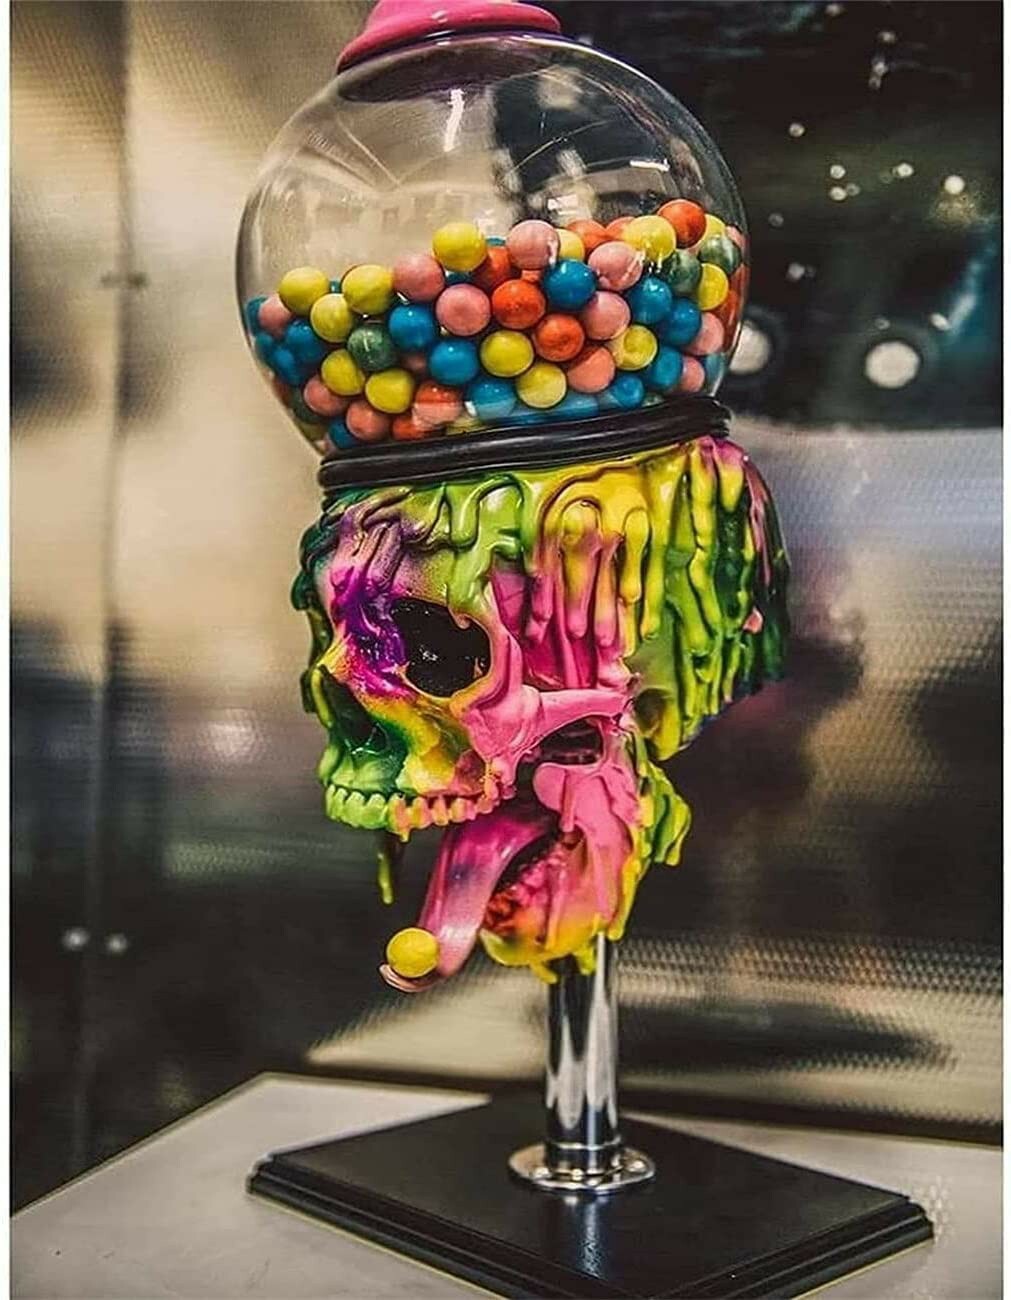 🔥LAST DAY 75% OFF☠️Bubble Gum Machine Realistic Skull Candy Dispenser,Buy 2⚡Free Shipping⚡